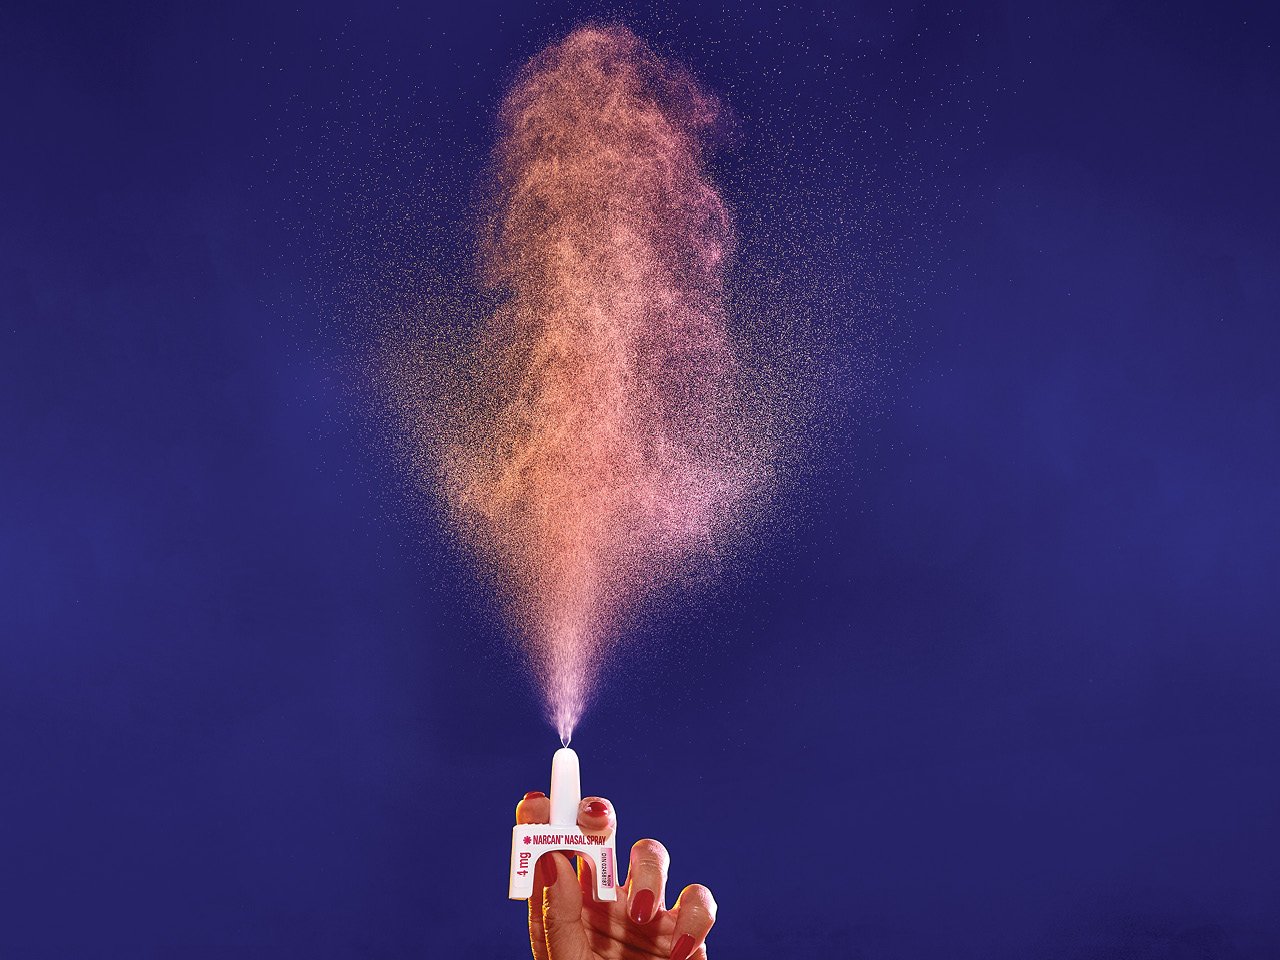 A woman's hands spraying naloxone into the air against a dark blue background.